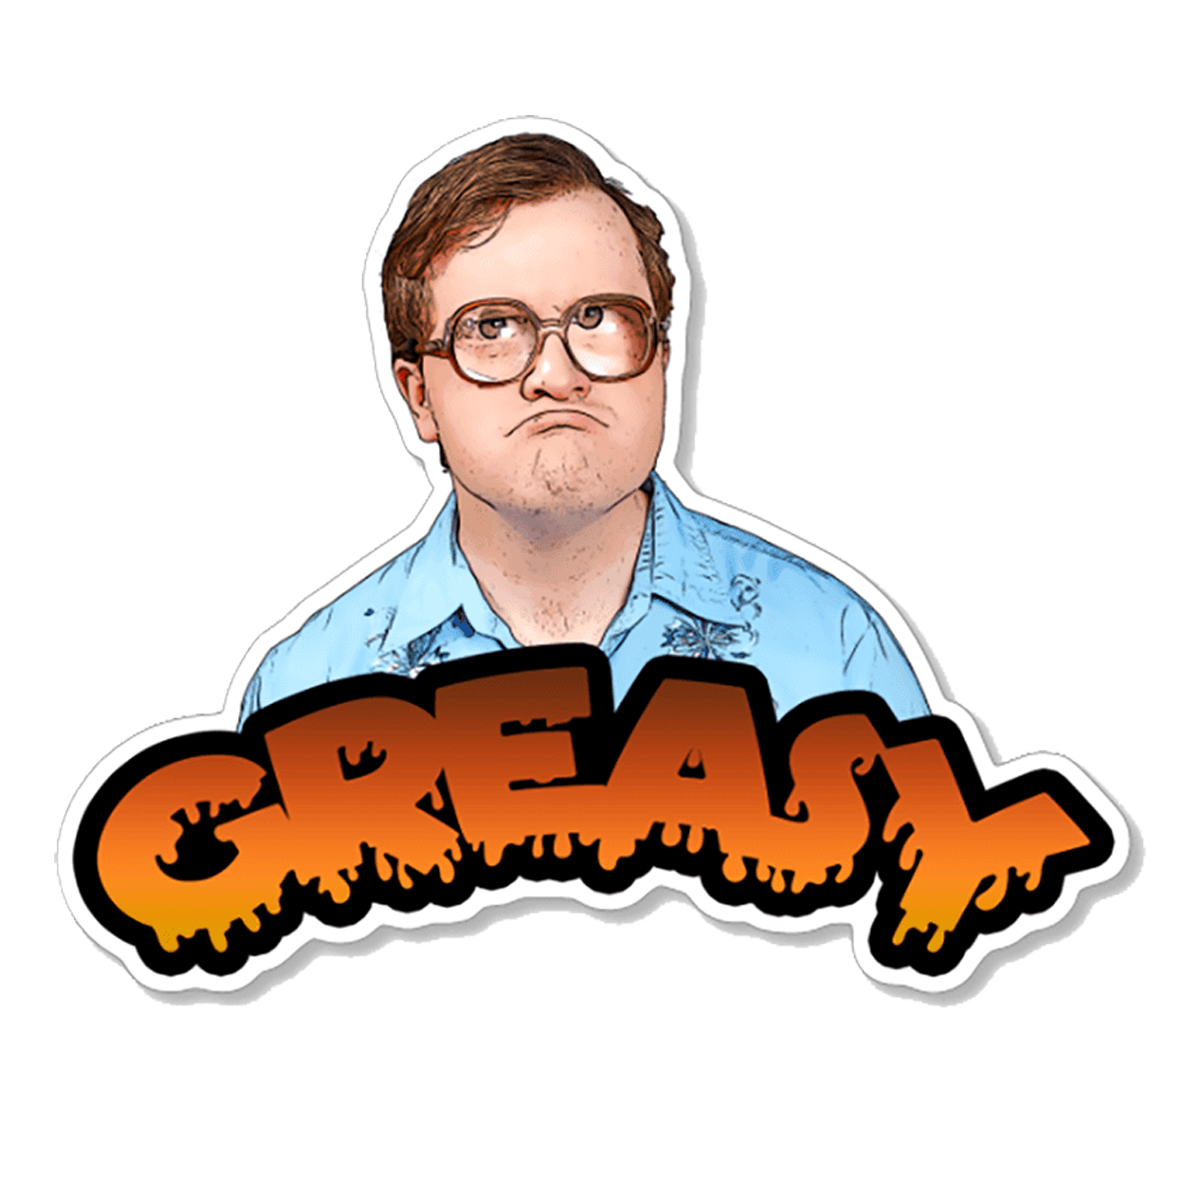 Trailer Park Boys Bubbles Greasy Sticker | Officially Licensed Bubbles That's A Nice Kitty Sticker | Trailer Park Boys Bubbles Quotes with Glasses